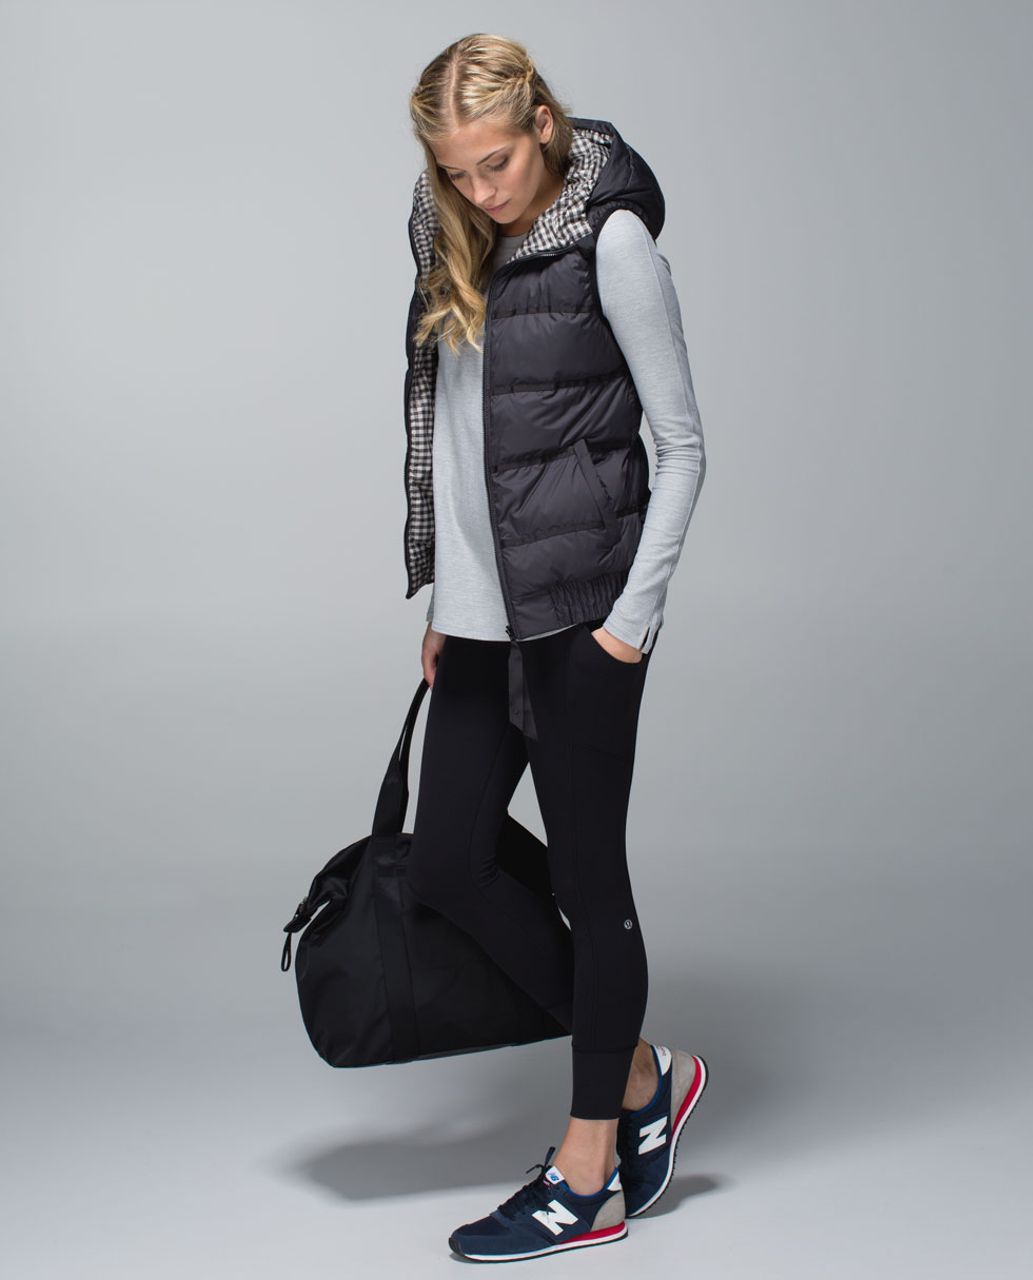 Lululemon Chilly Chill Puffy Vest - Black / Gin Gin Gingham Embossed Black Mojave Tan